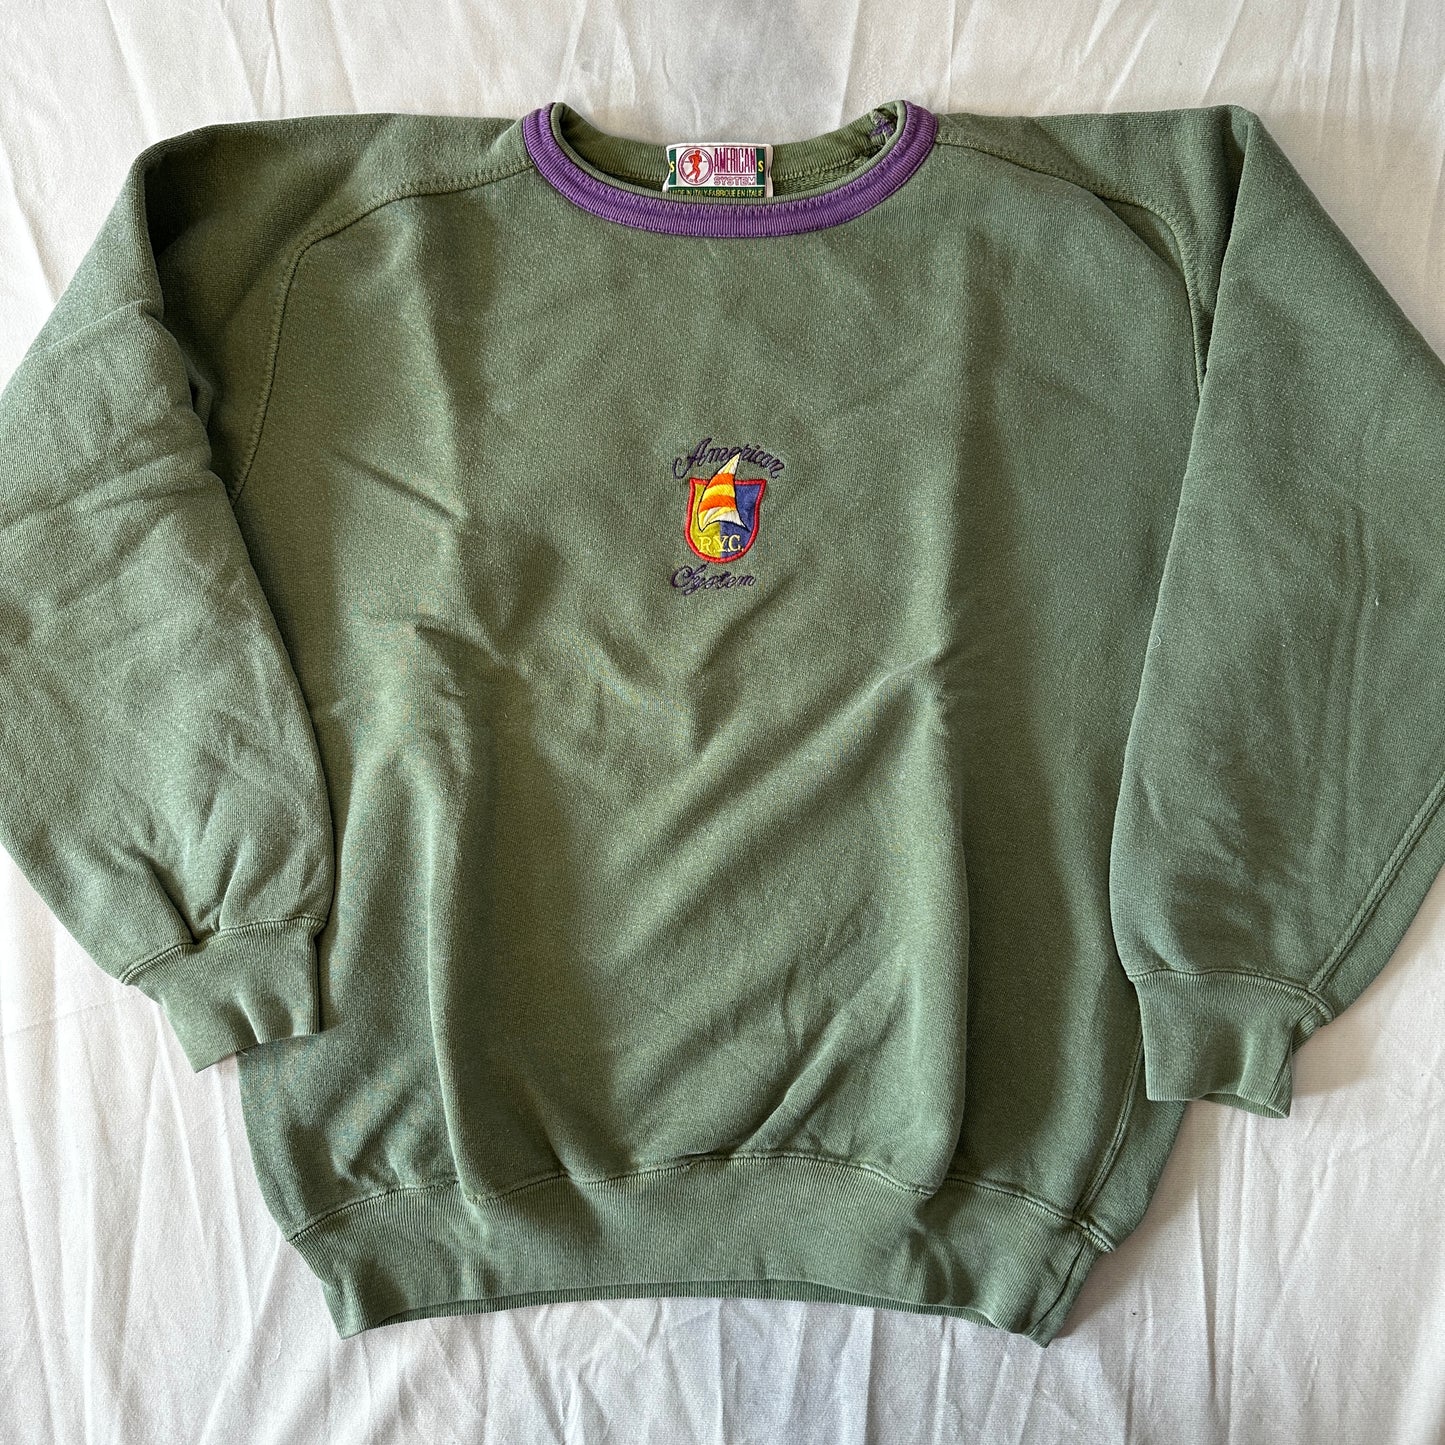 American System 80s Vintage Sweatshirt- M - Made in Italy